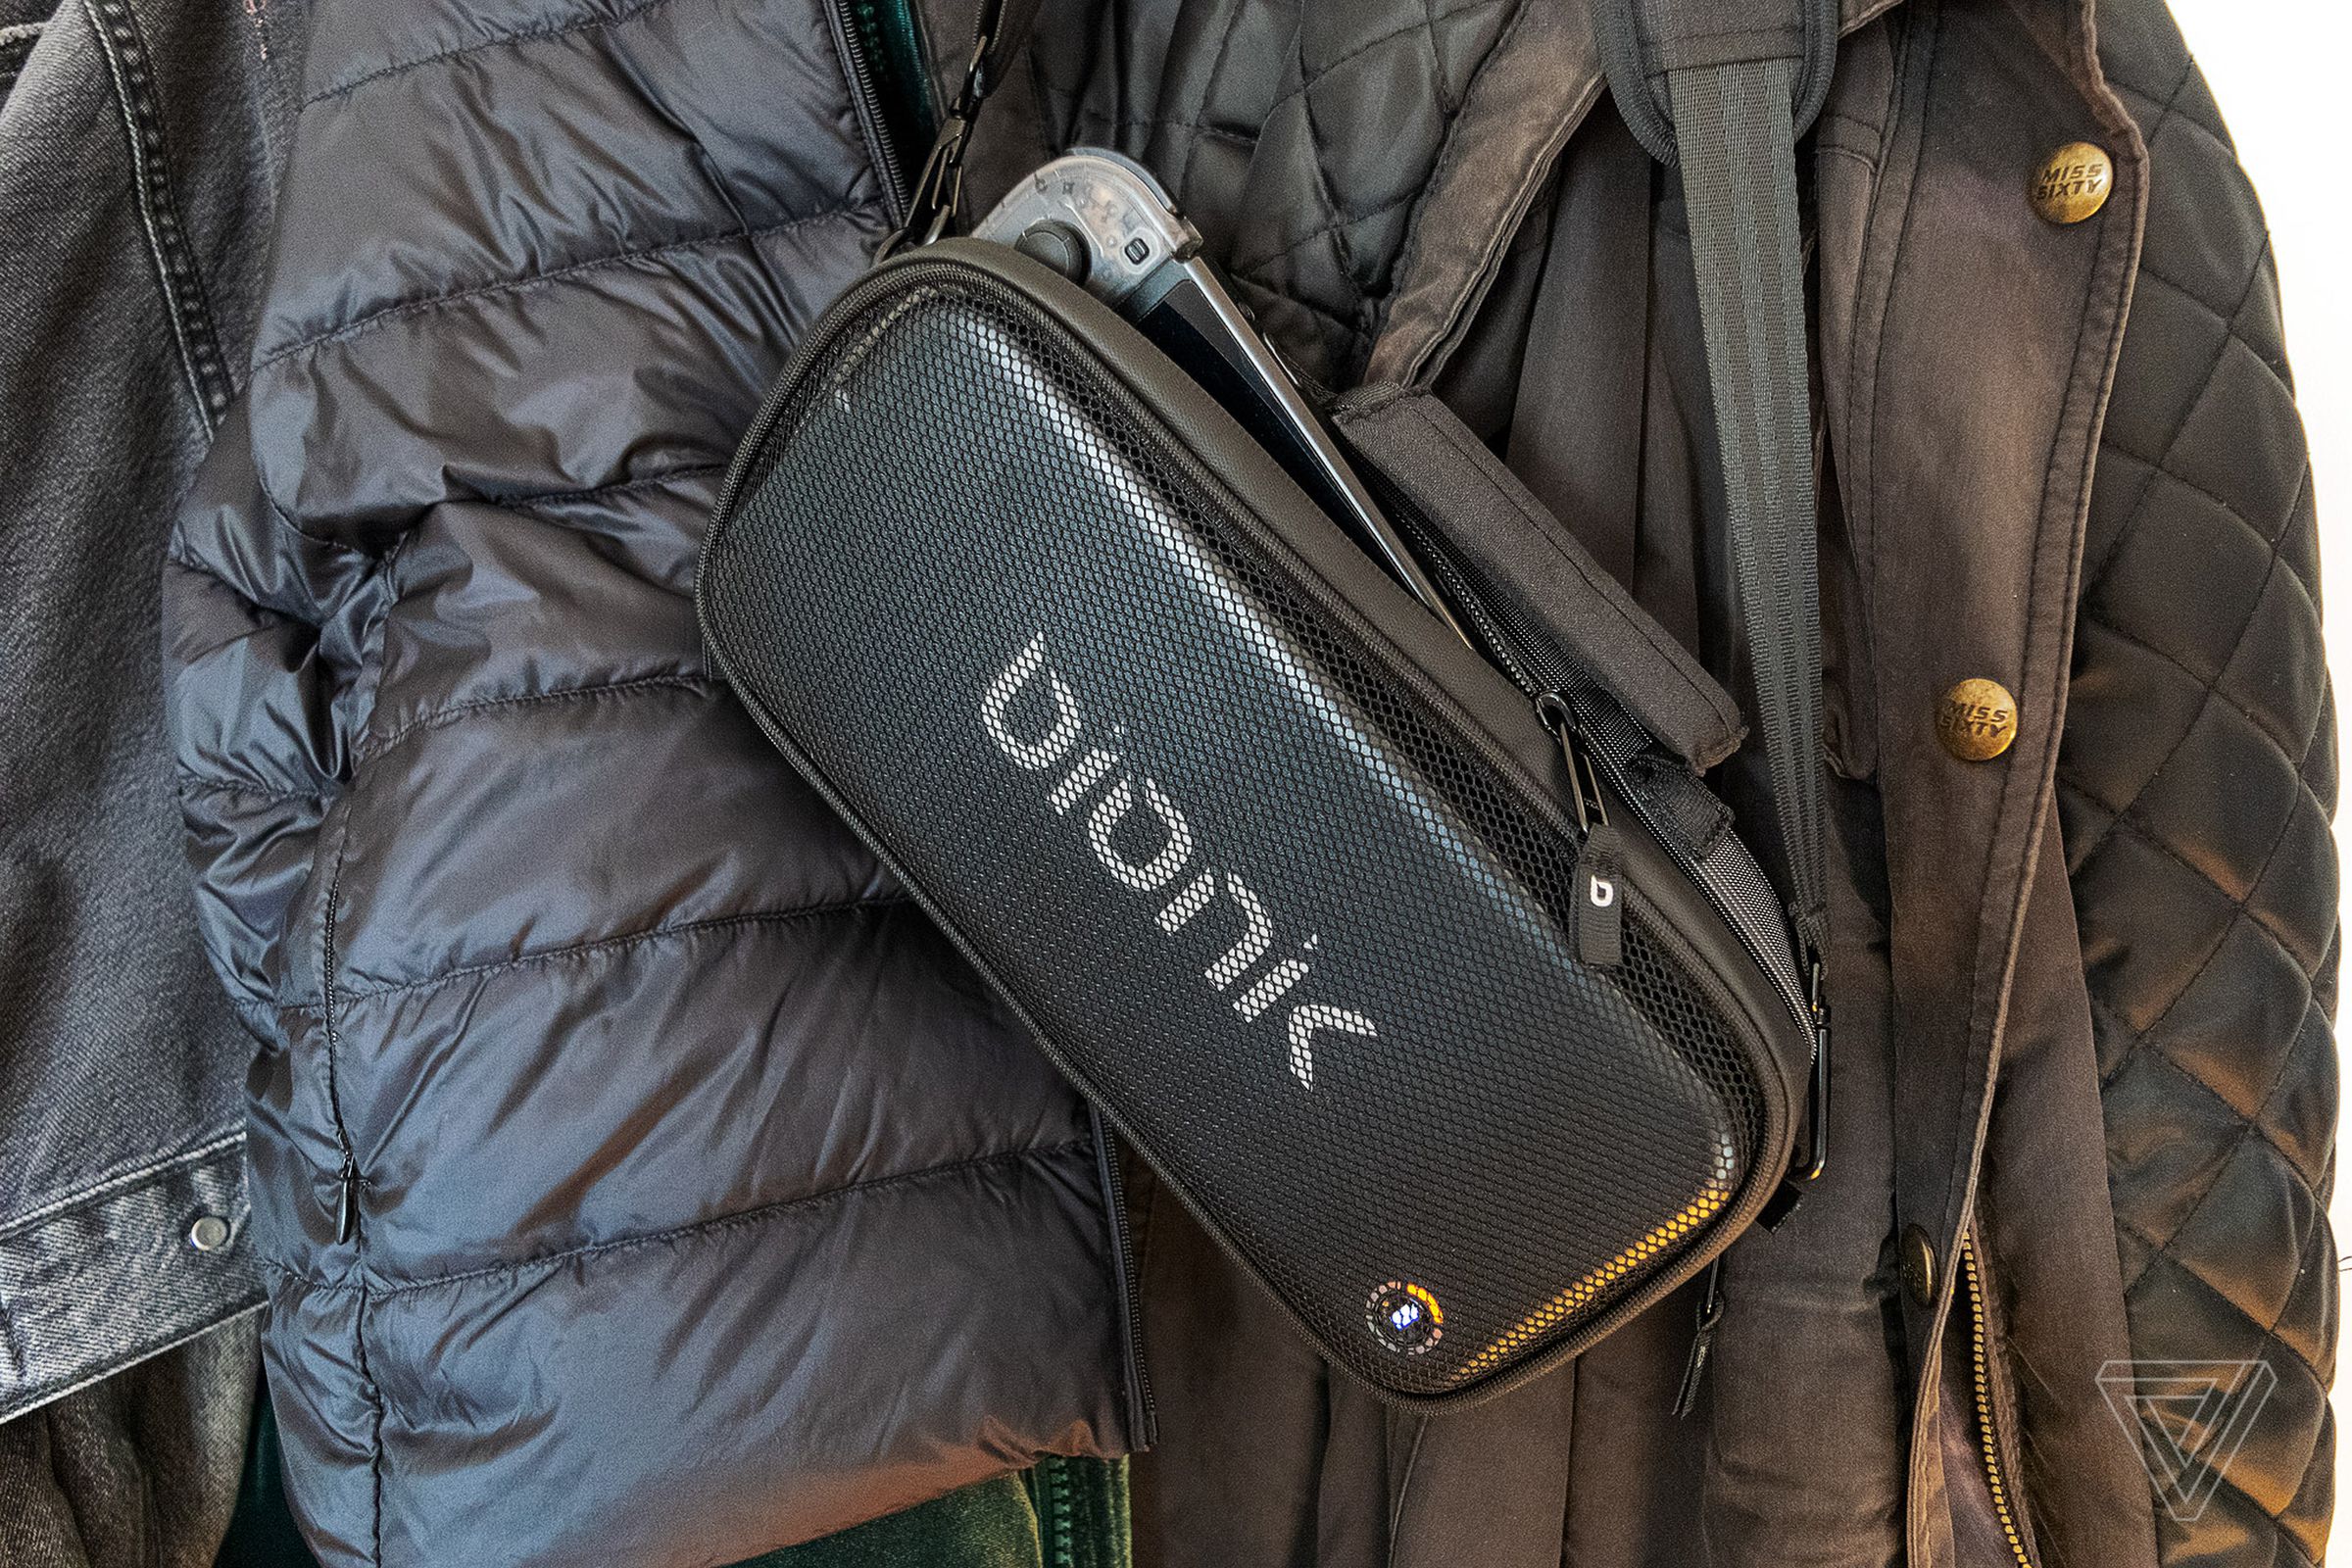 The mesh pocket on the outside of the bag is used  to hold the battery pack in place.